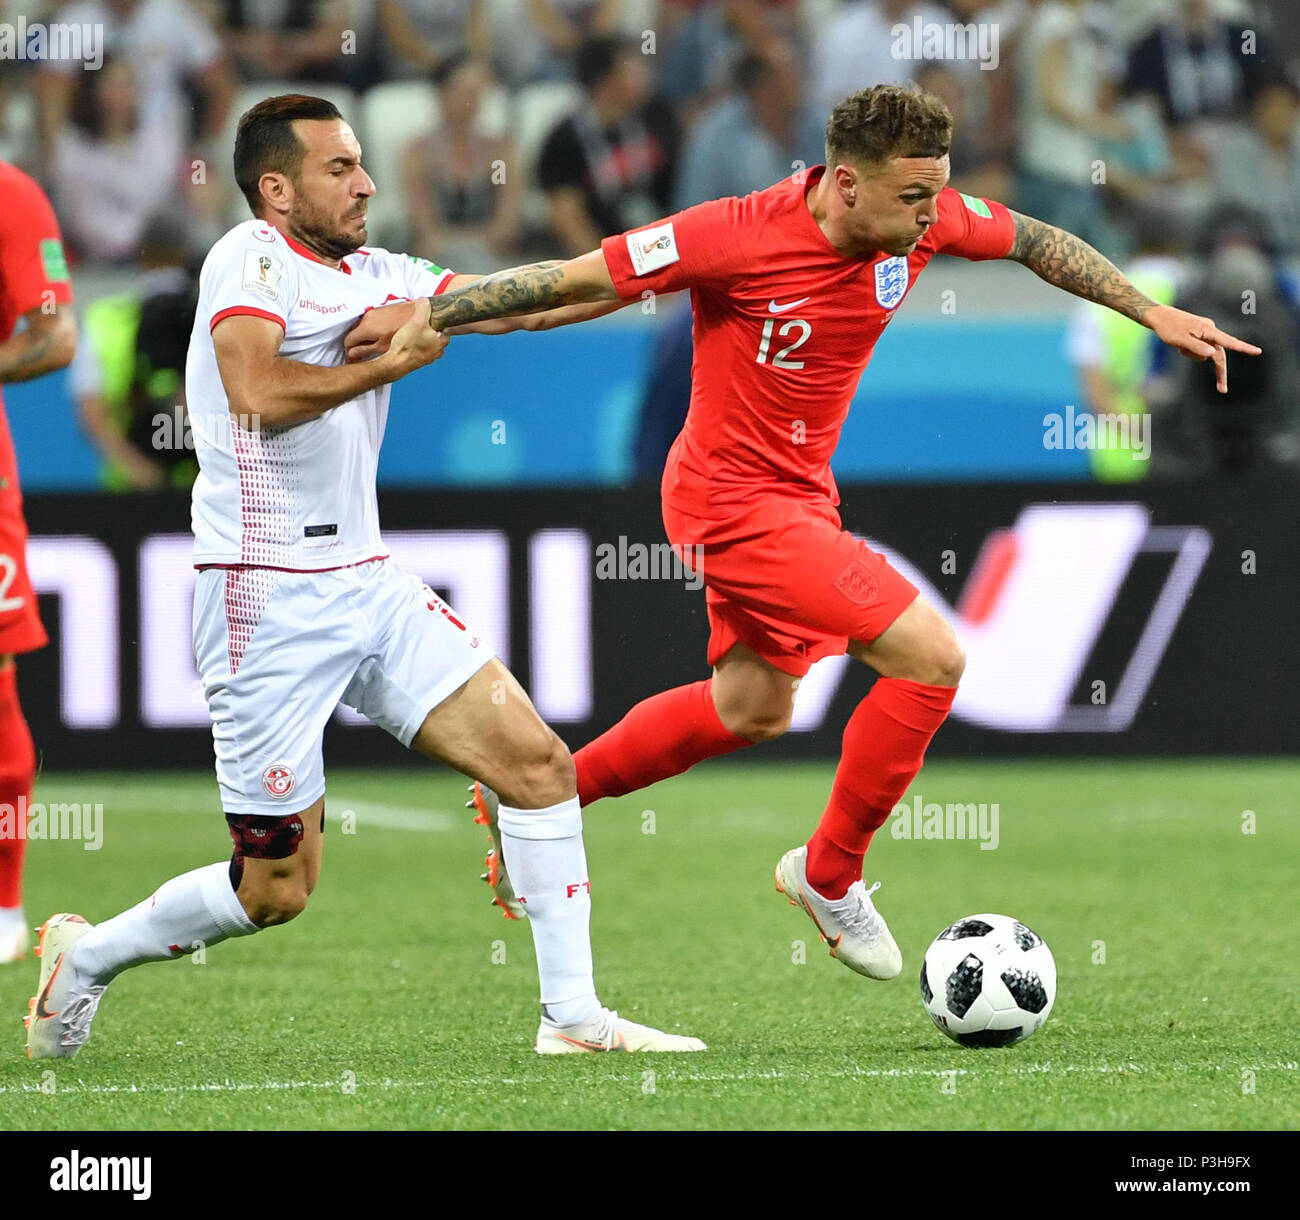 Volgograd, Russia. 18th June, 2018. Kieran Trippier (R) of England vies with Ali Maaloul of Tunisia during a group G match between Tunisia and England at the 2018 FIFA World Cup in Volgograd, Russia, June 18, 2018. Credit: Liu Dawei/Xinhua/Alamy Live News Stock Photo